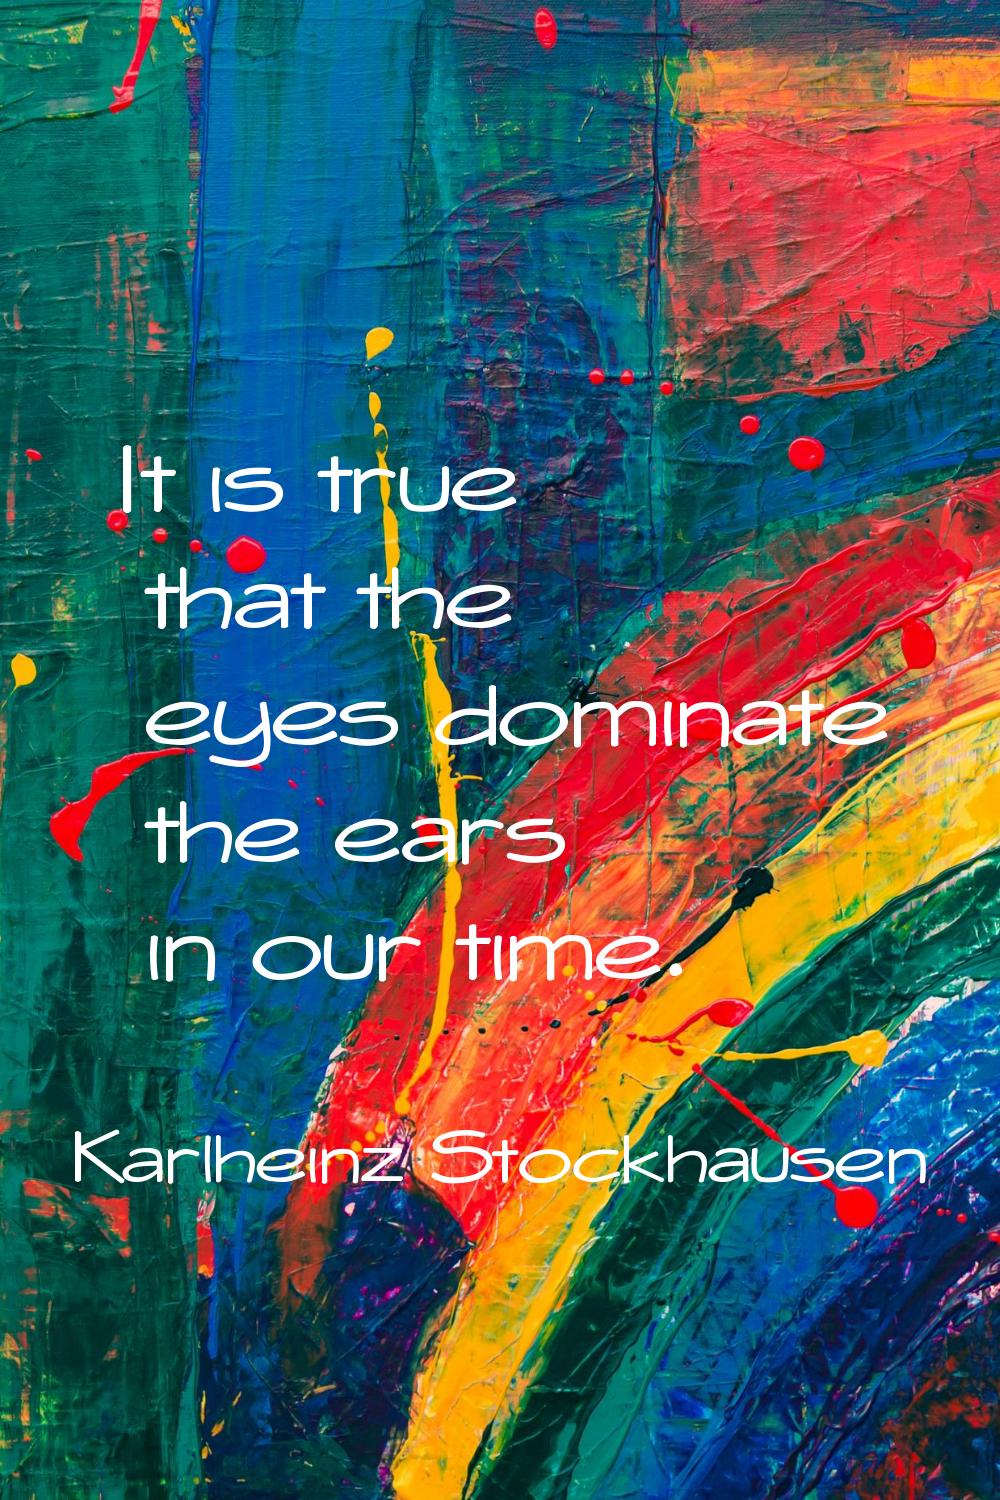 It is true that the eyes dominate the ears in our time.